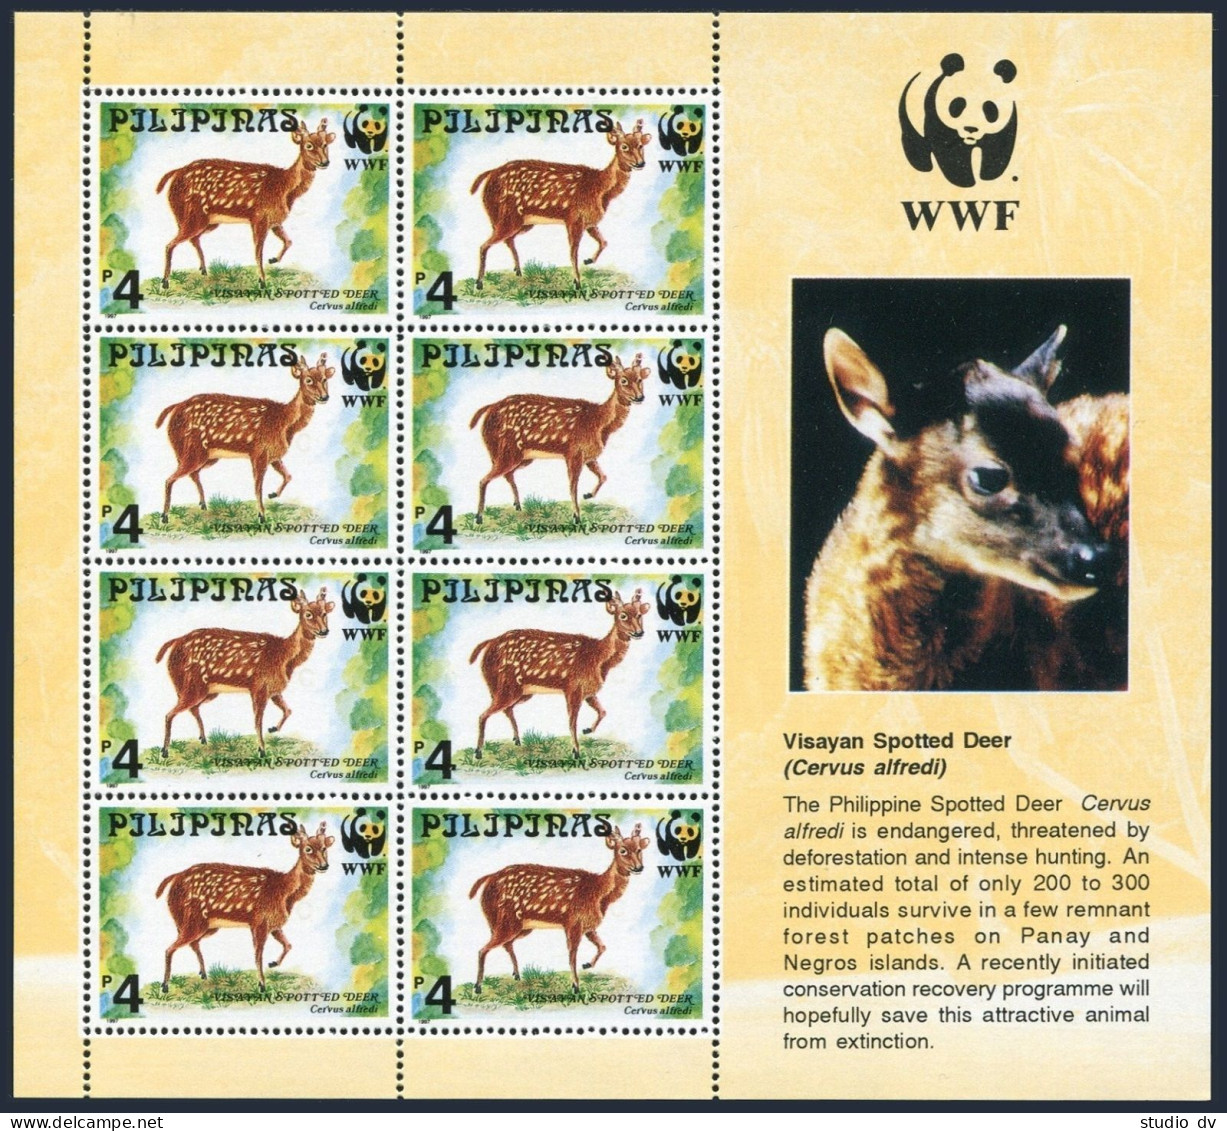 Philippines 2476a-2479a Sheets, MNH. WWF 1997. Visayan Spotted Deer,Warty Pig. - Philippinen